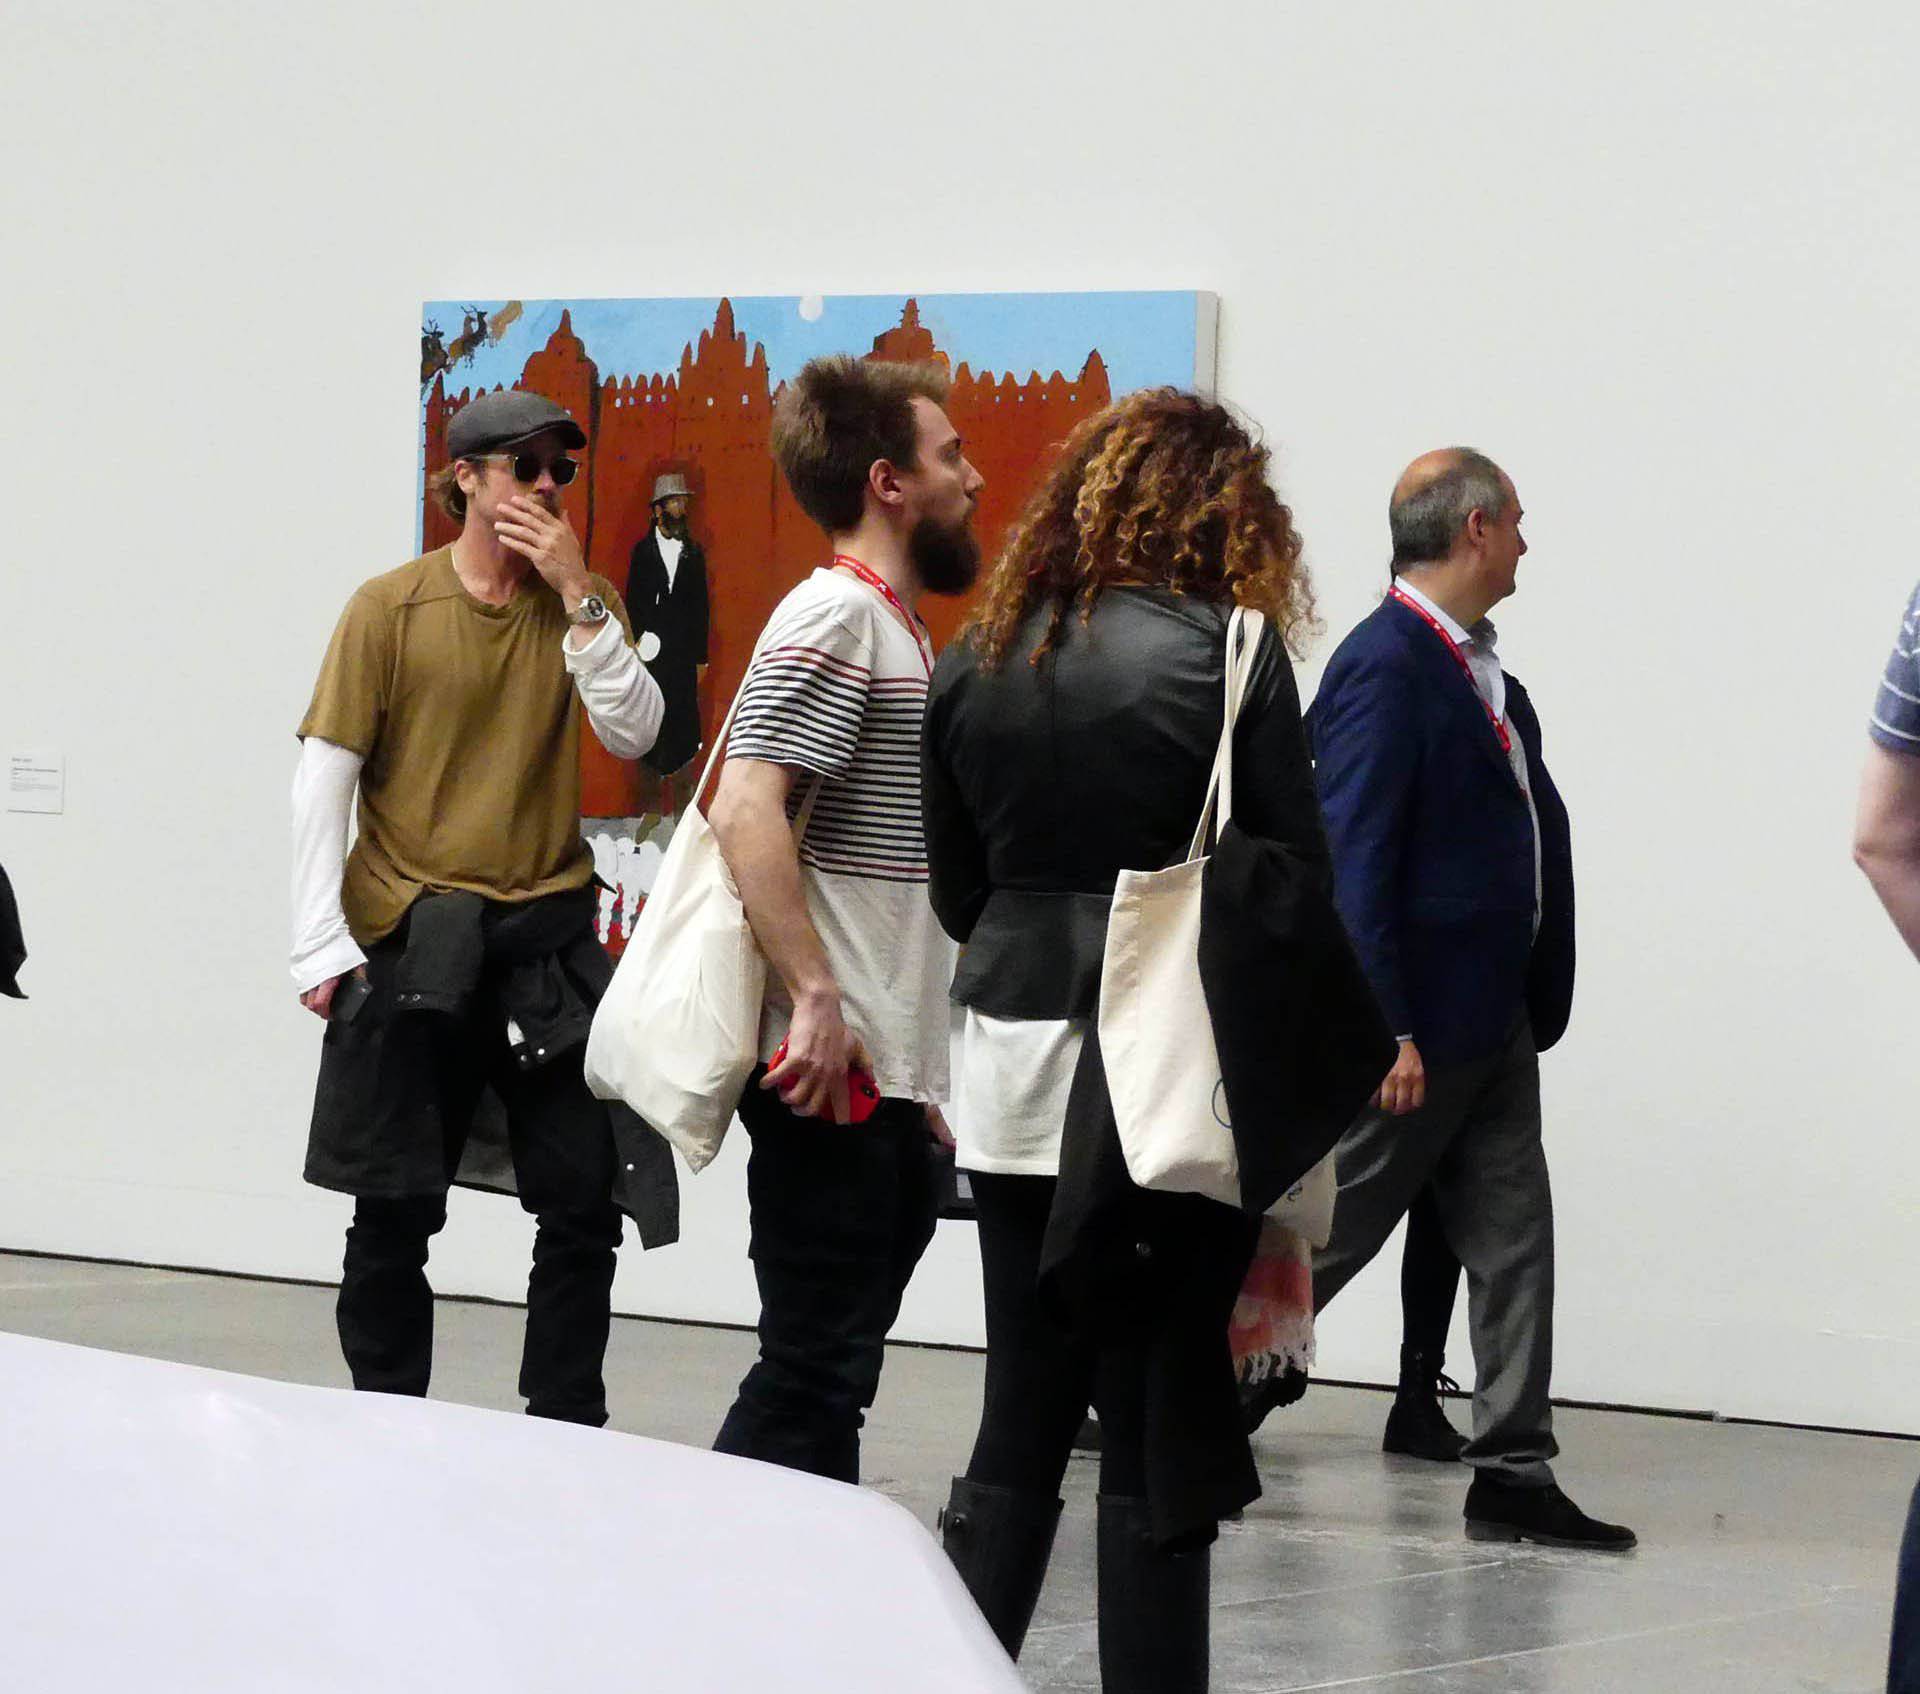 Brad Pitt visiting some exhibitions at the Biennale of Art in Venice